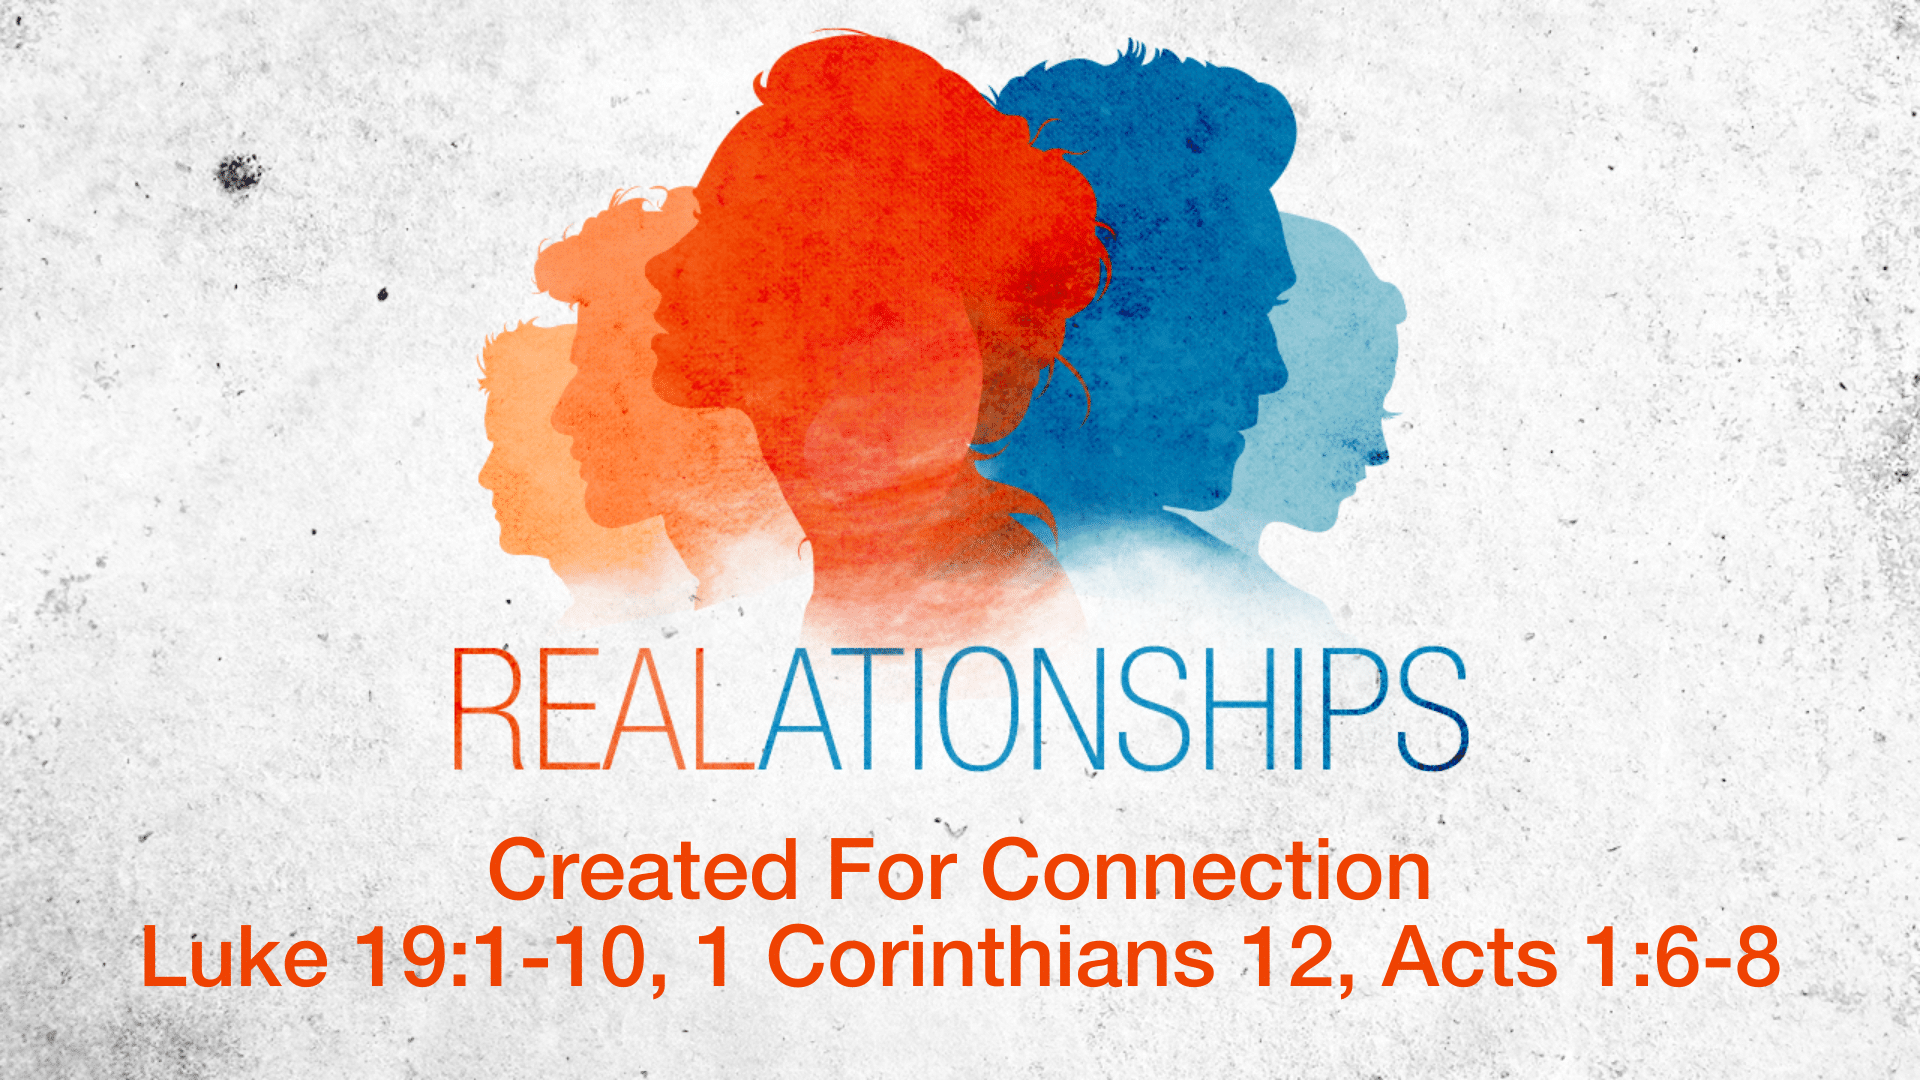 REALationships: Created For Connection